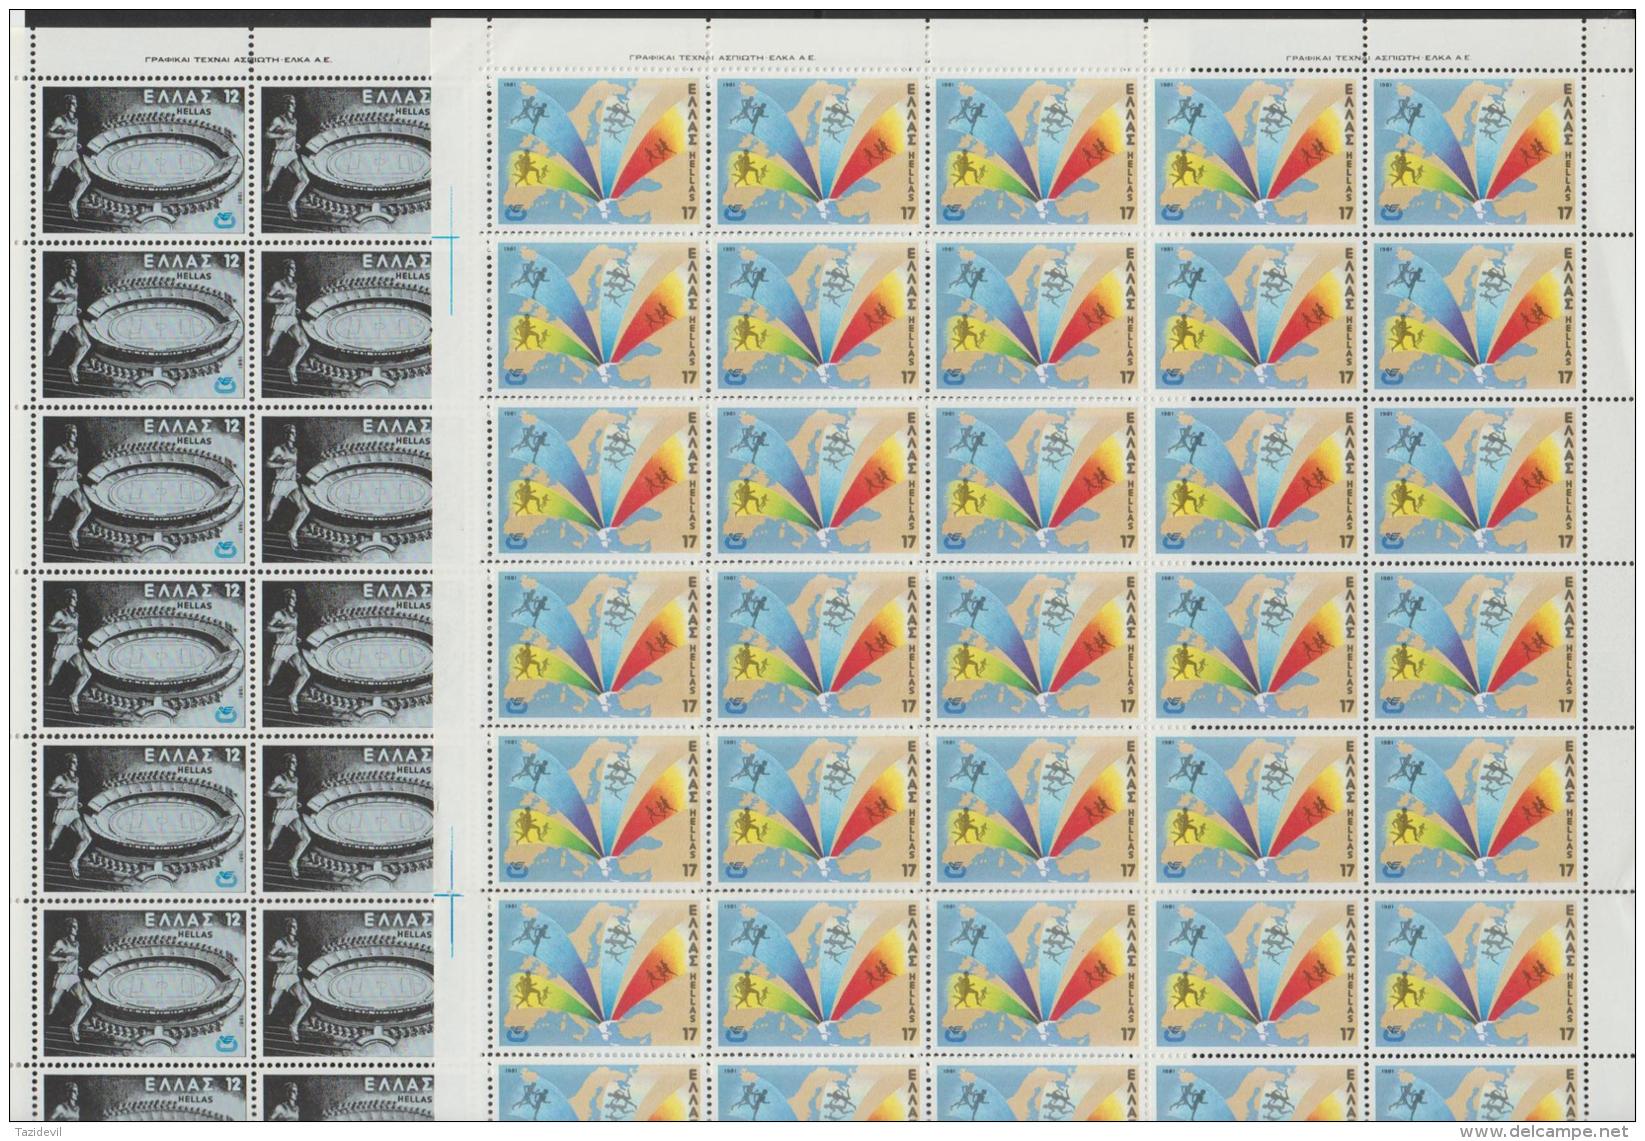 GREECE - 1981 Athletic Championships - Olympic Stadium Part Sheets Of 45. Scott 1388-89. MNH ** Priced To Clear - Fogli Completi